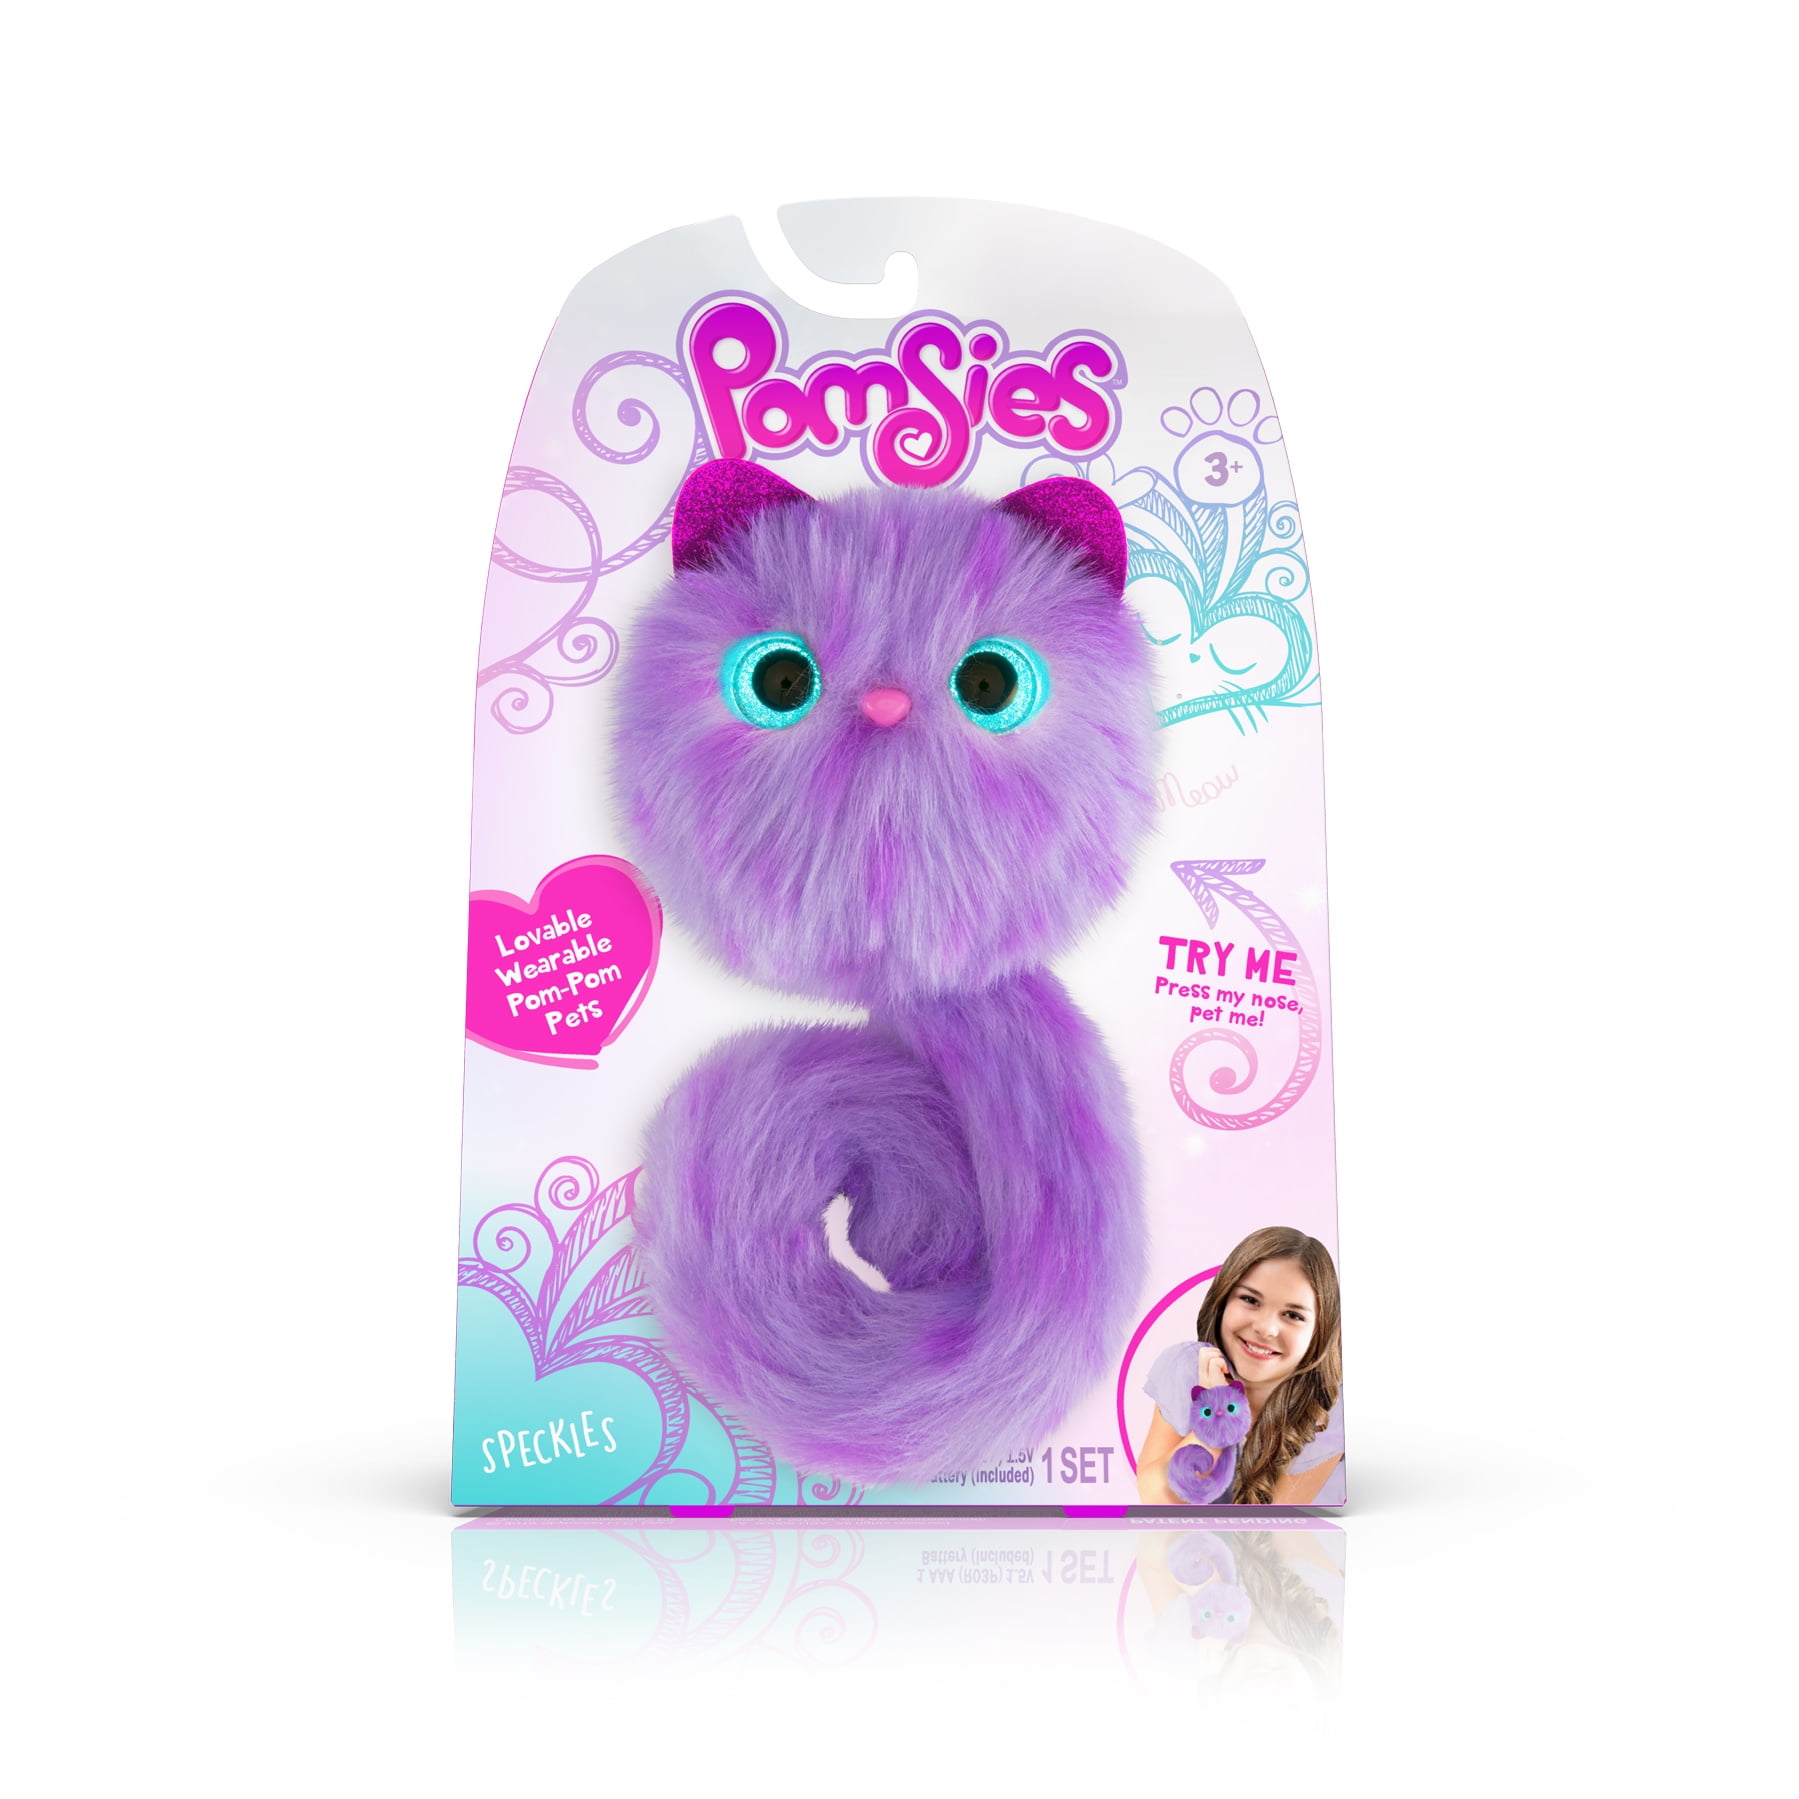 Pomsies Snowball Interactive Wearable Plush Pom Pom Pets by Sky Rocket 